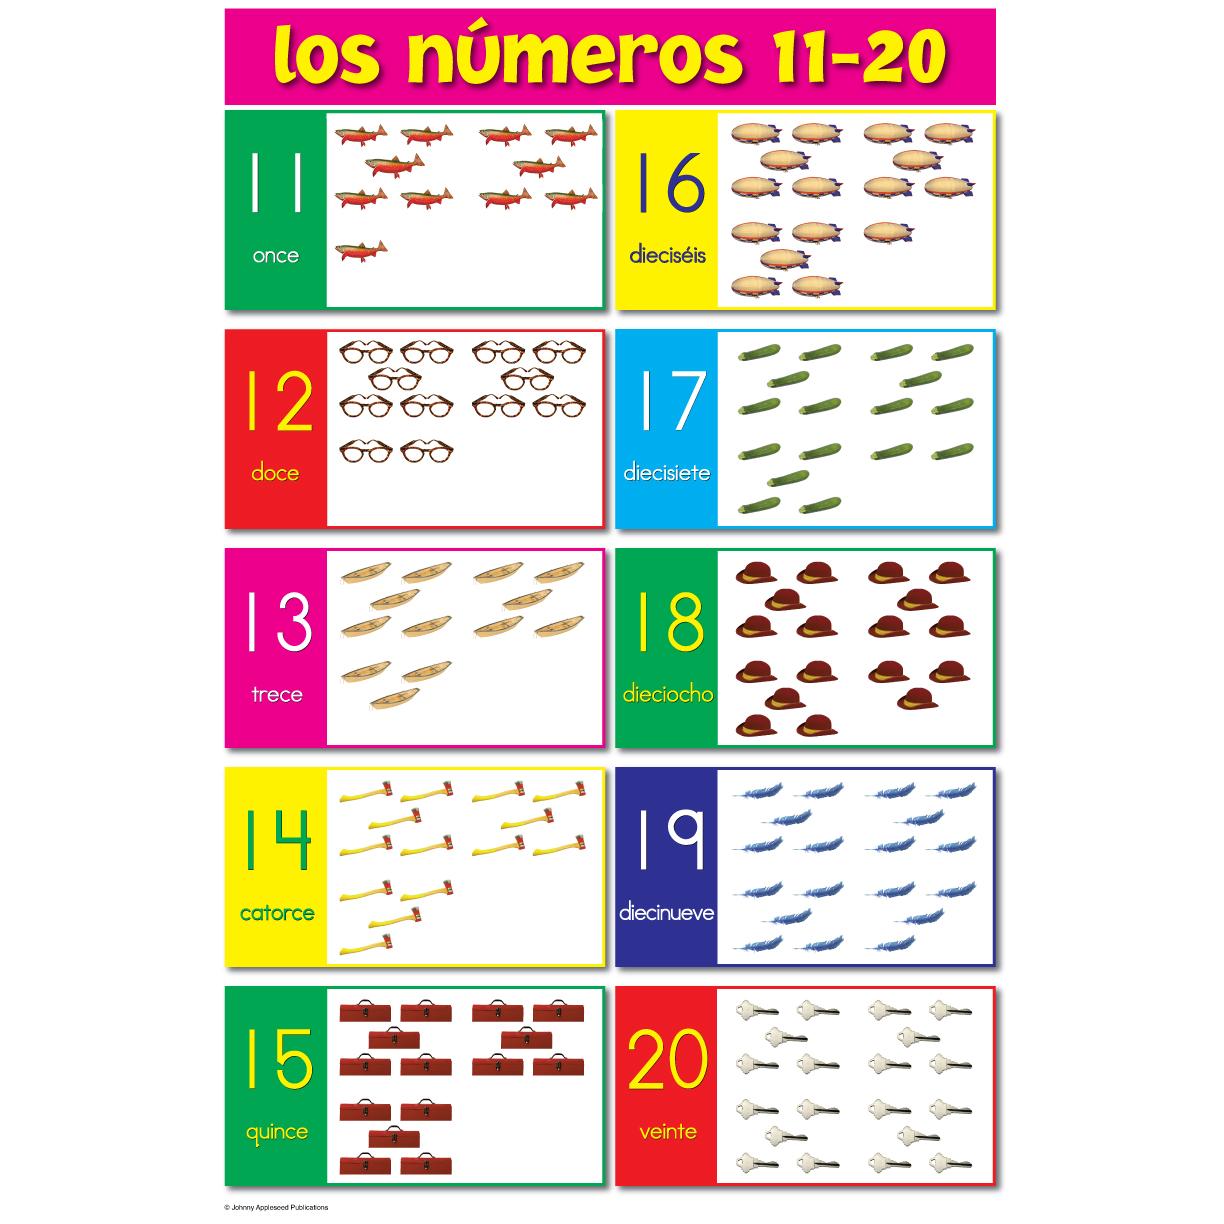 numbers-in-spanish-worksheets-and-how-to-count-1-1000